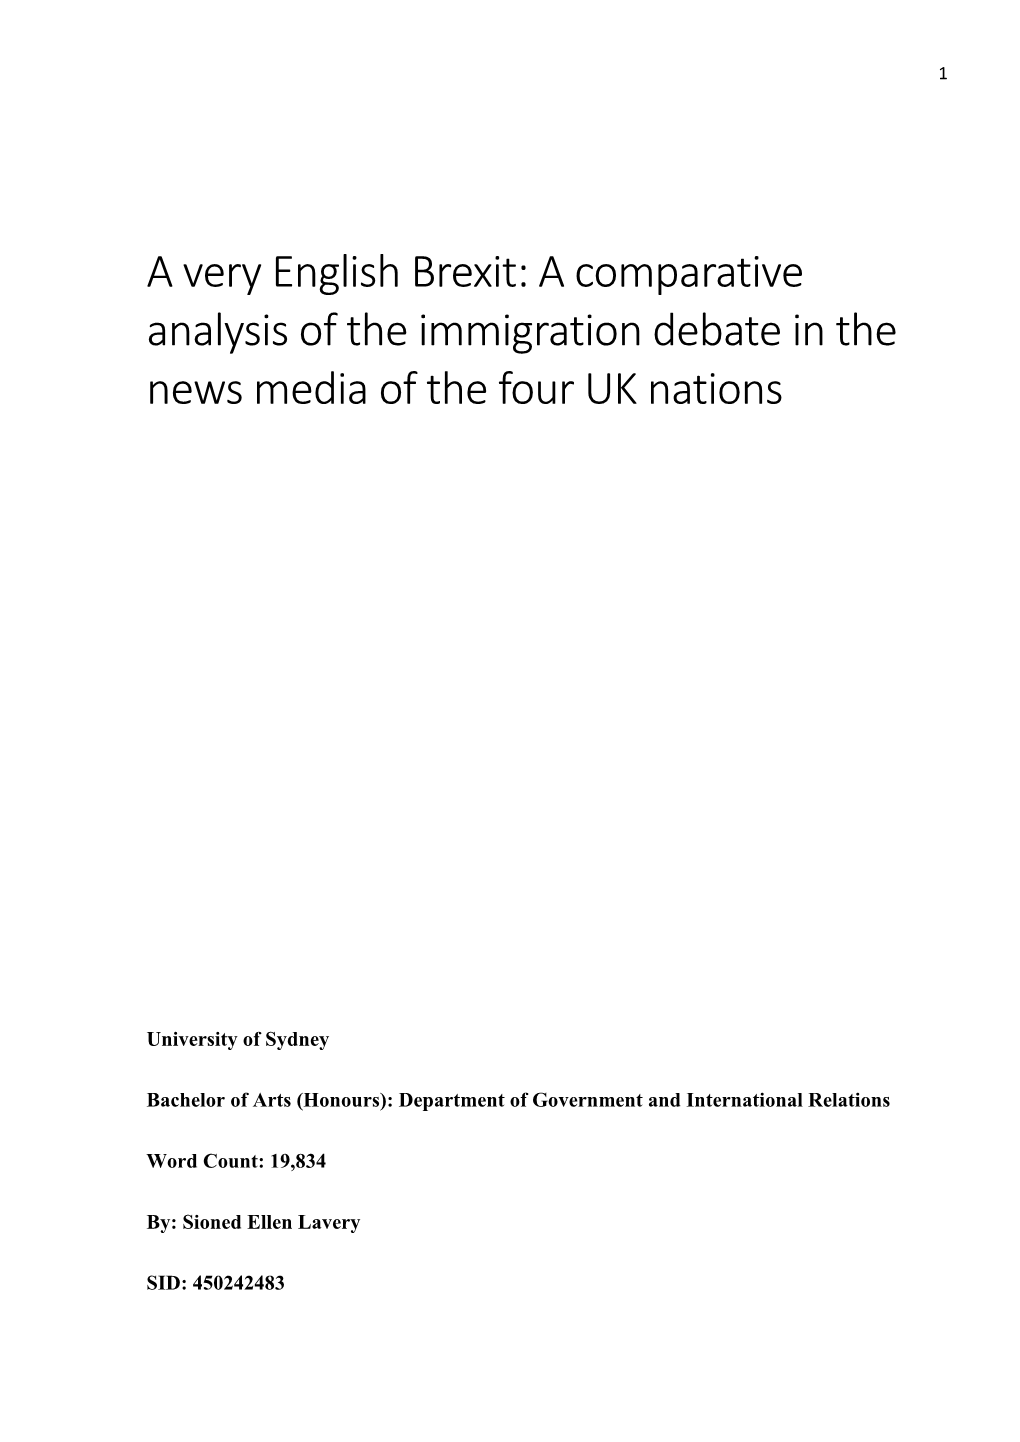 A Very English Brexit: a Comparative Analysis of the Immigration Debate in the News Media of the Four UK Nations